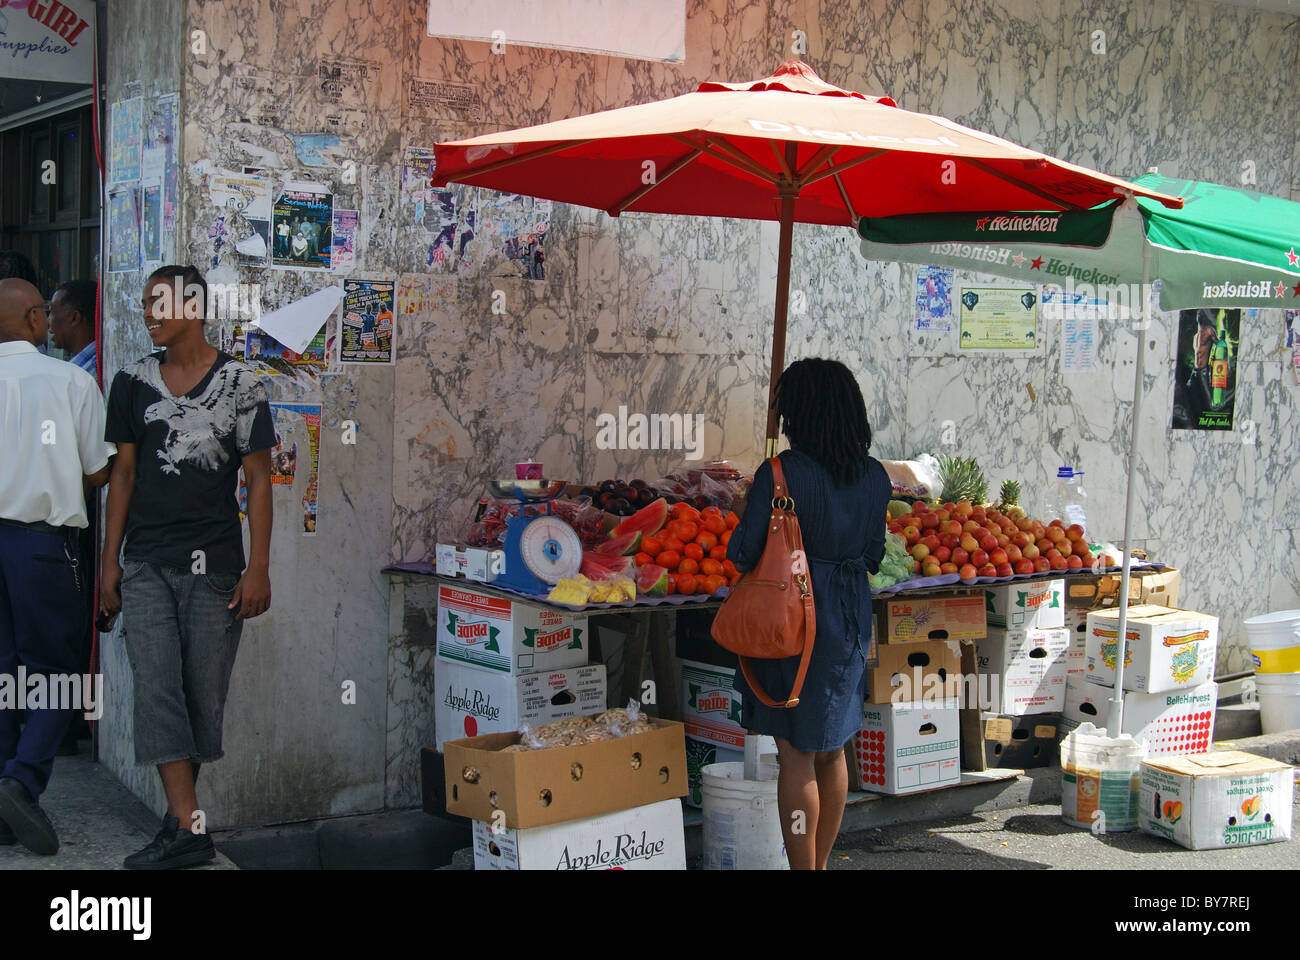 Woman buying fruit from outdoor market stall, Bridgetown, Barbados, Caribbean. Stock Photo